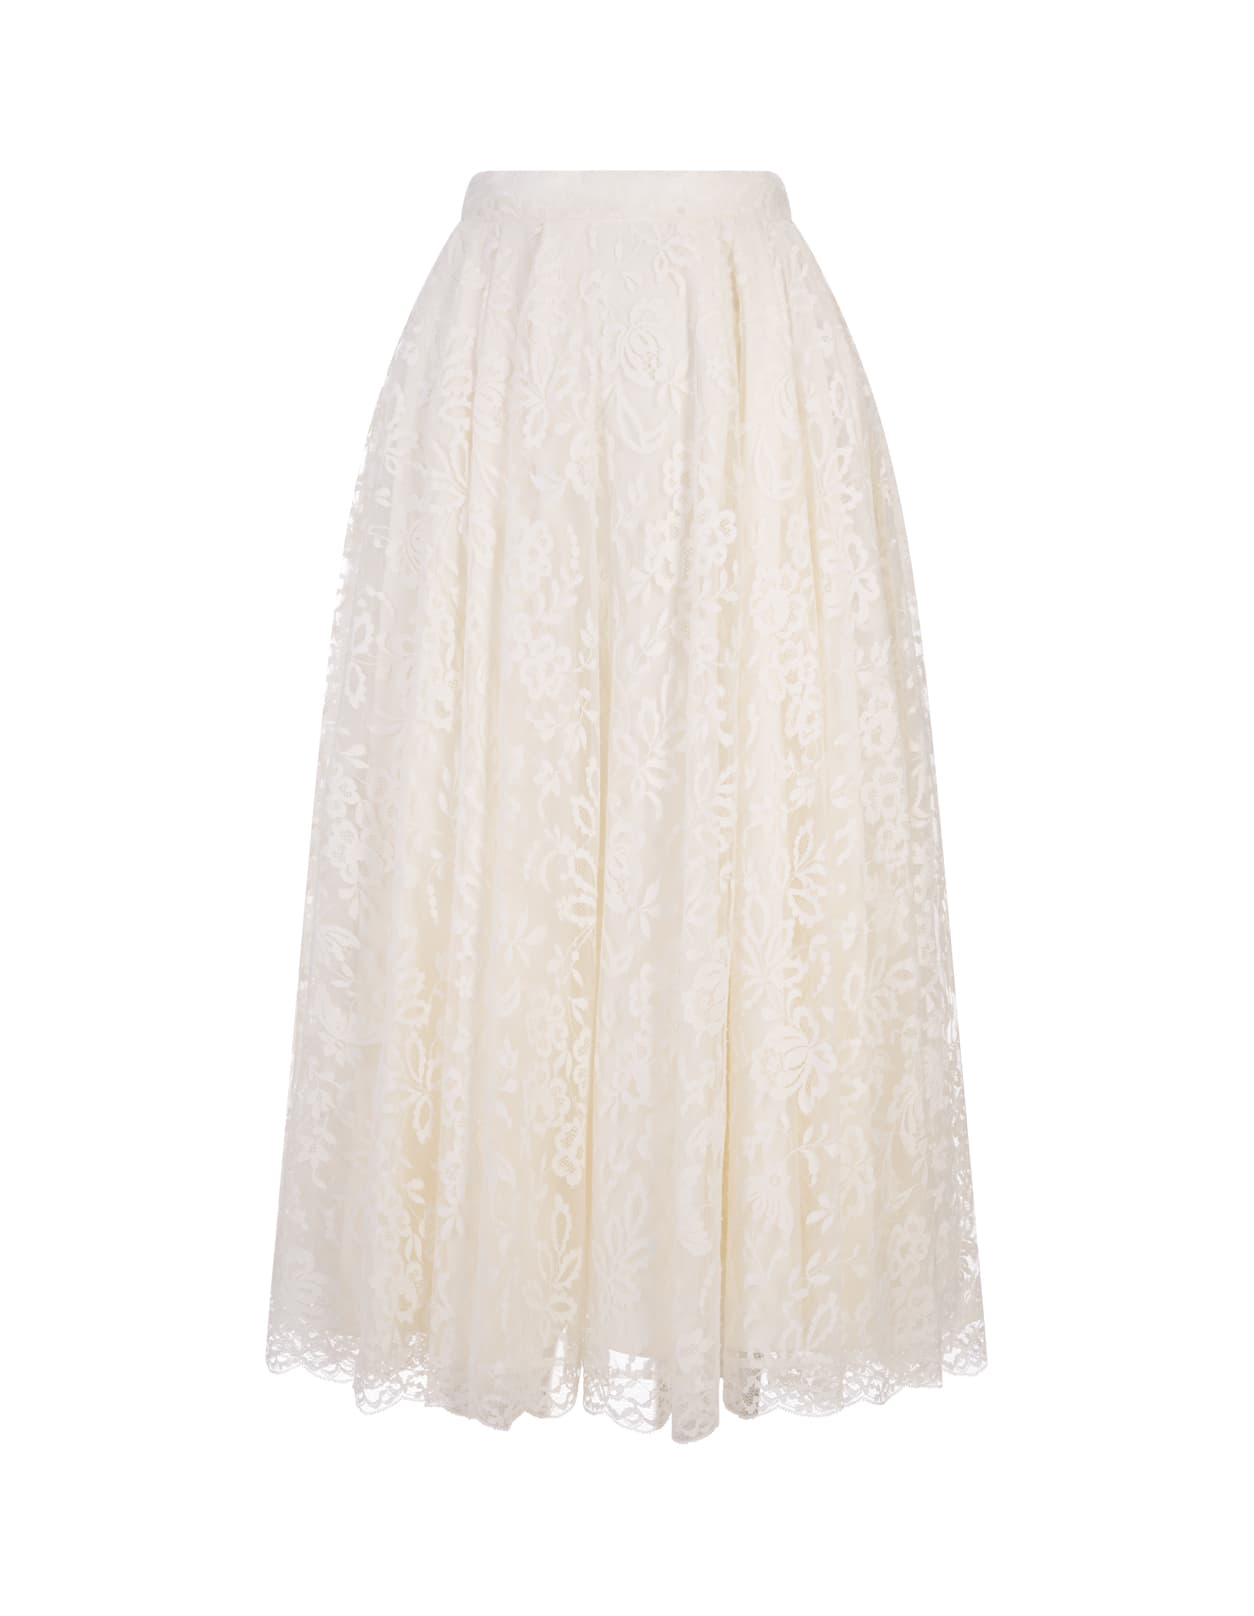 Alexander McQueen Ivory Floral Lace Midi Skirt